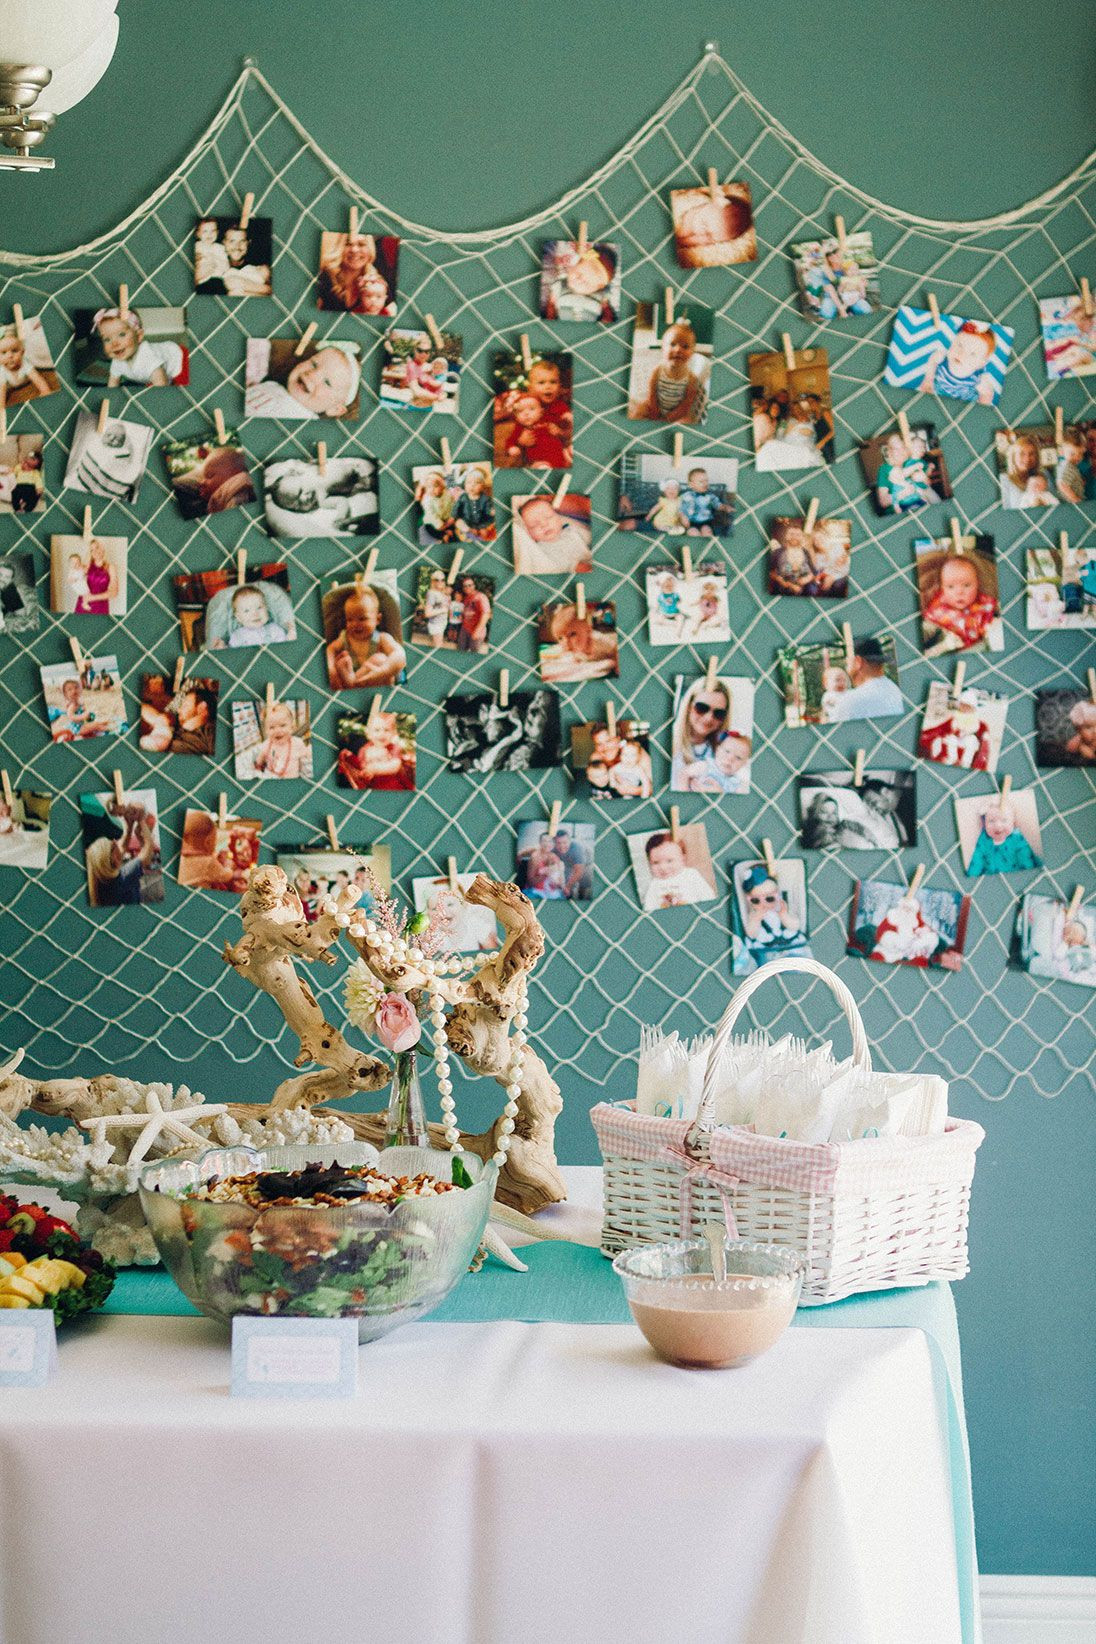 Mermaid Themed Party Ideas
 Galleries Emilee s Mermaid Themed Birthday Party